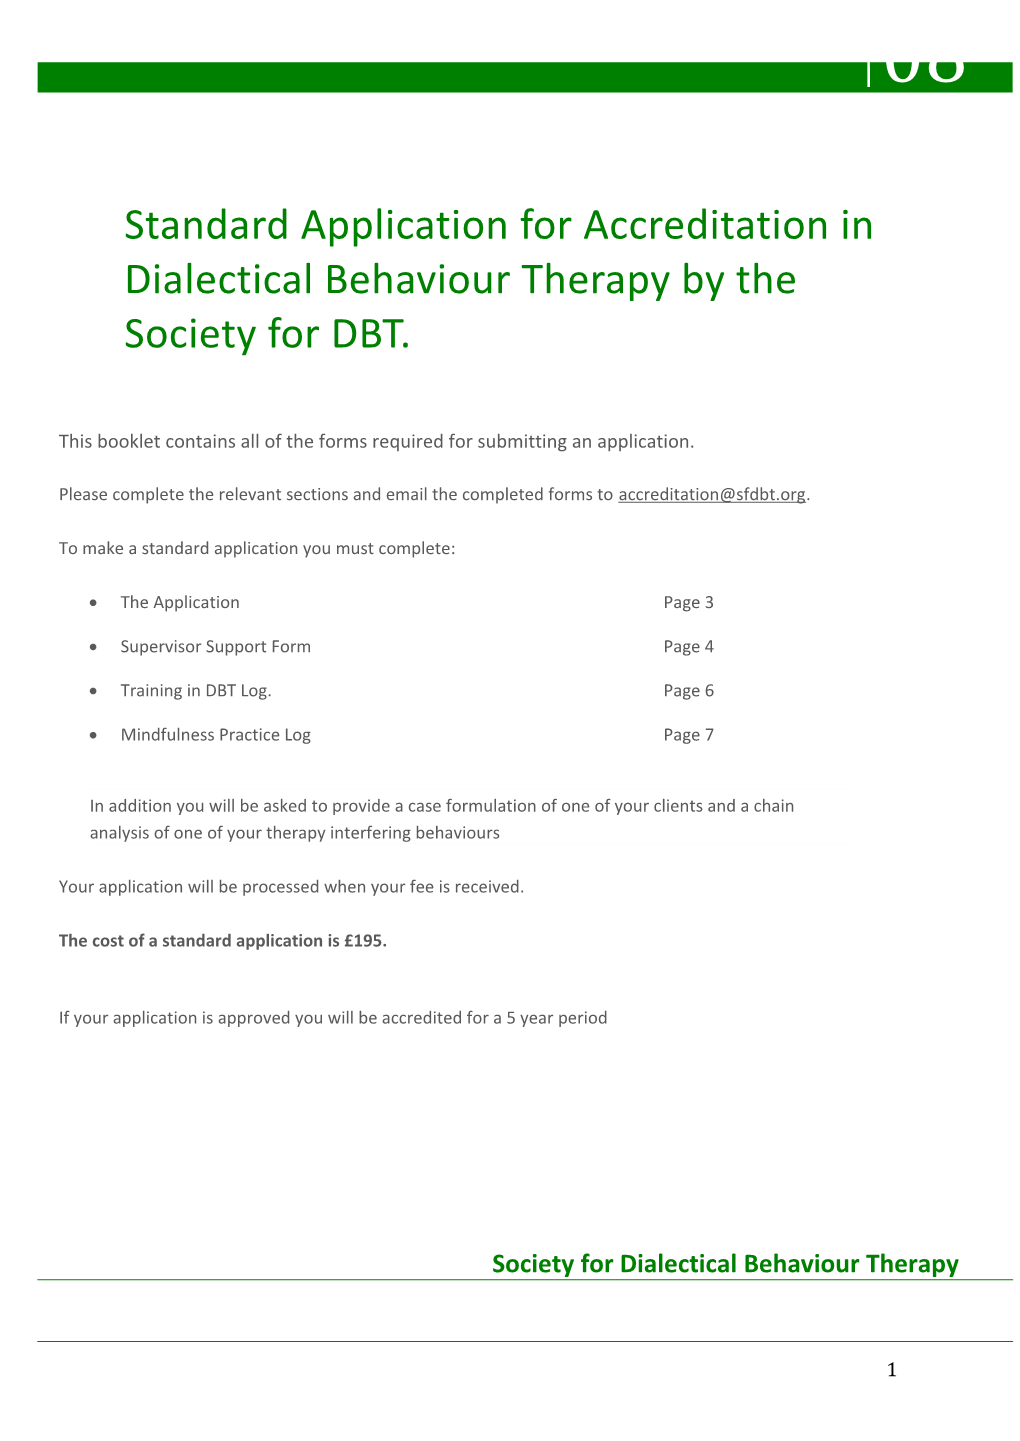 Application for Accreditation in Dialectical Behaviour Therapy by the Society for DBT